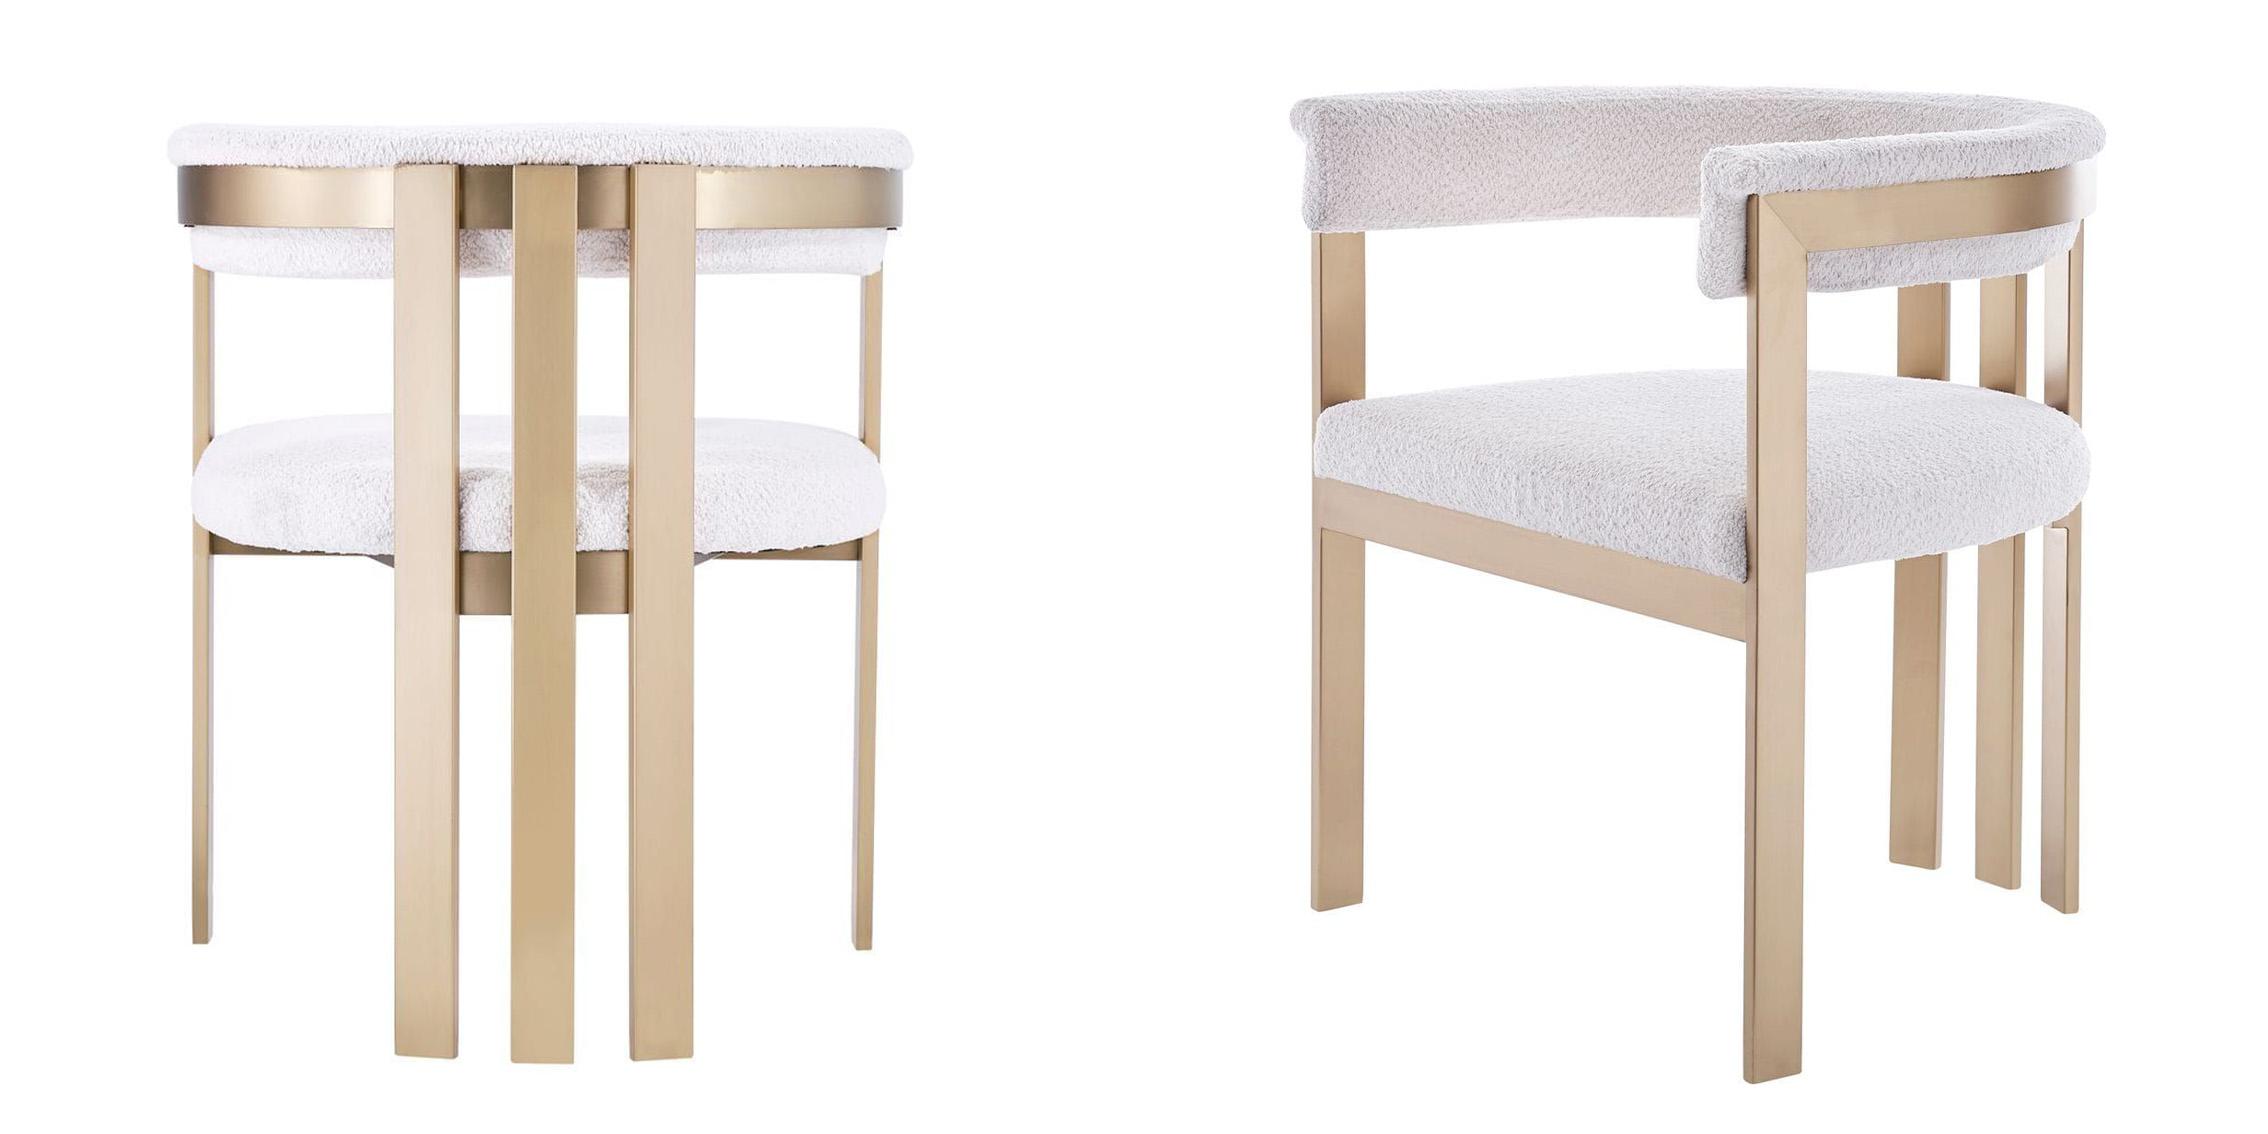 Contemporary, Modern Dining Chair Set VGZAY129-BEI-DC-Set-2 VGZAY129-BEI-DC-Set-2 in Gold, Beige Fabric